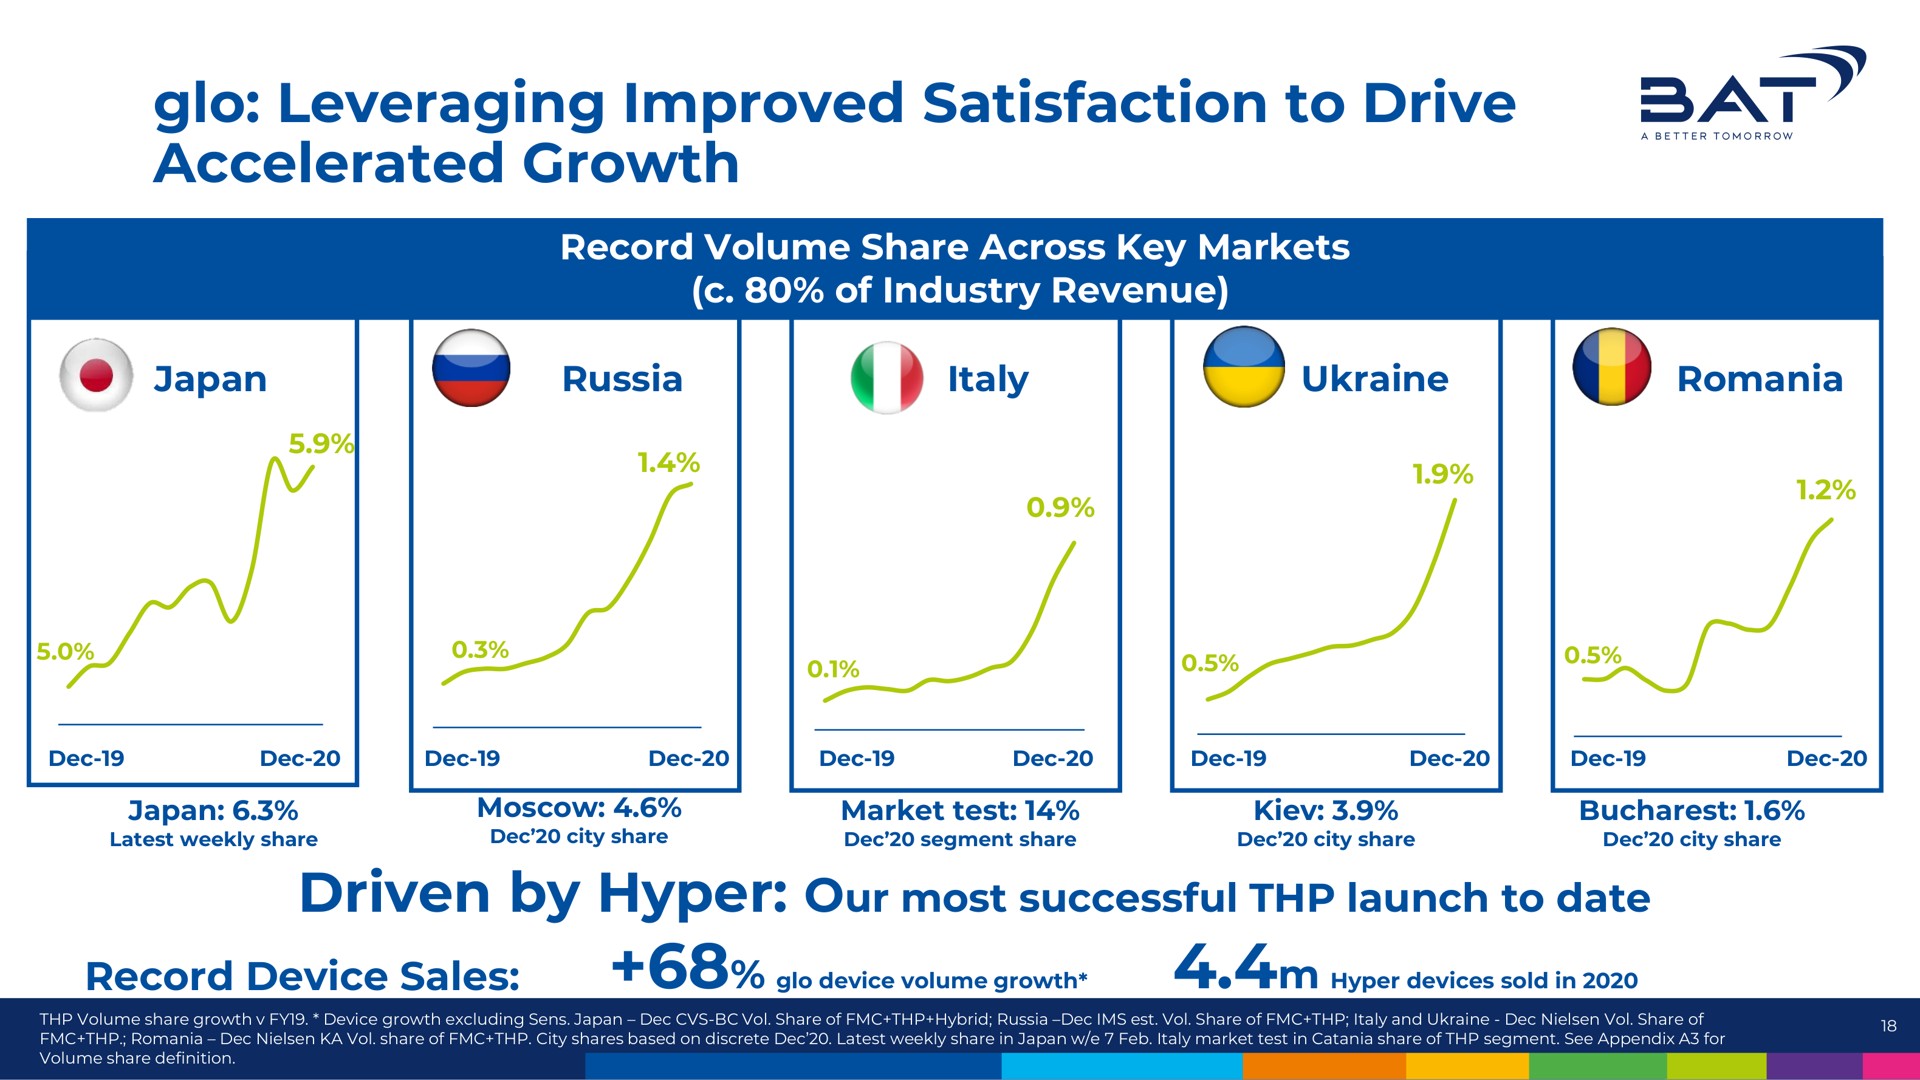 leveraging improved satisfaction to drive accelerated growth sat driven by hyper our most successful launch date | BAT